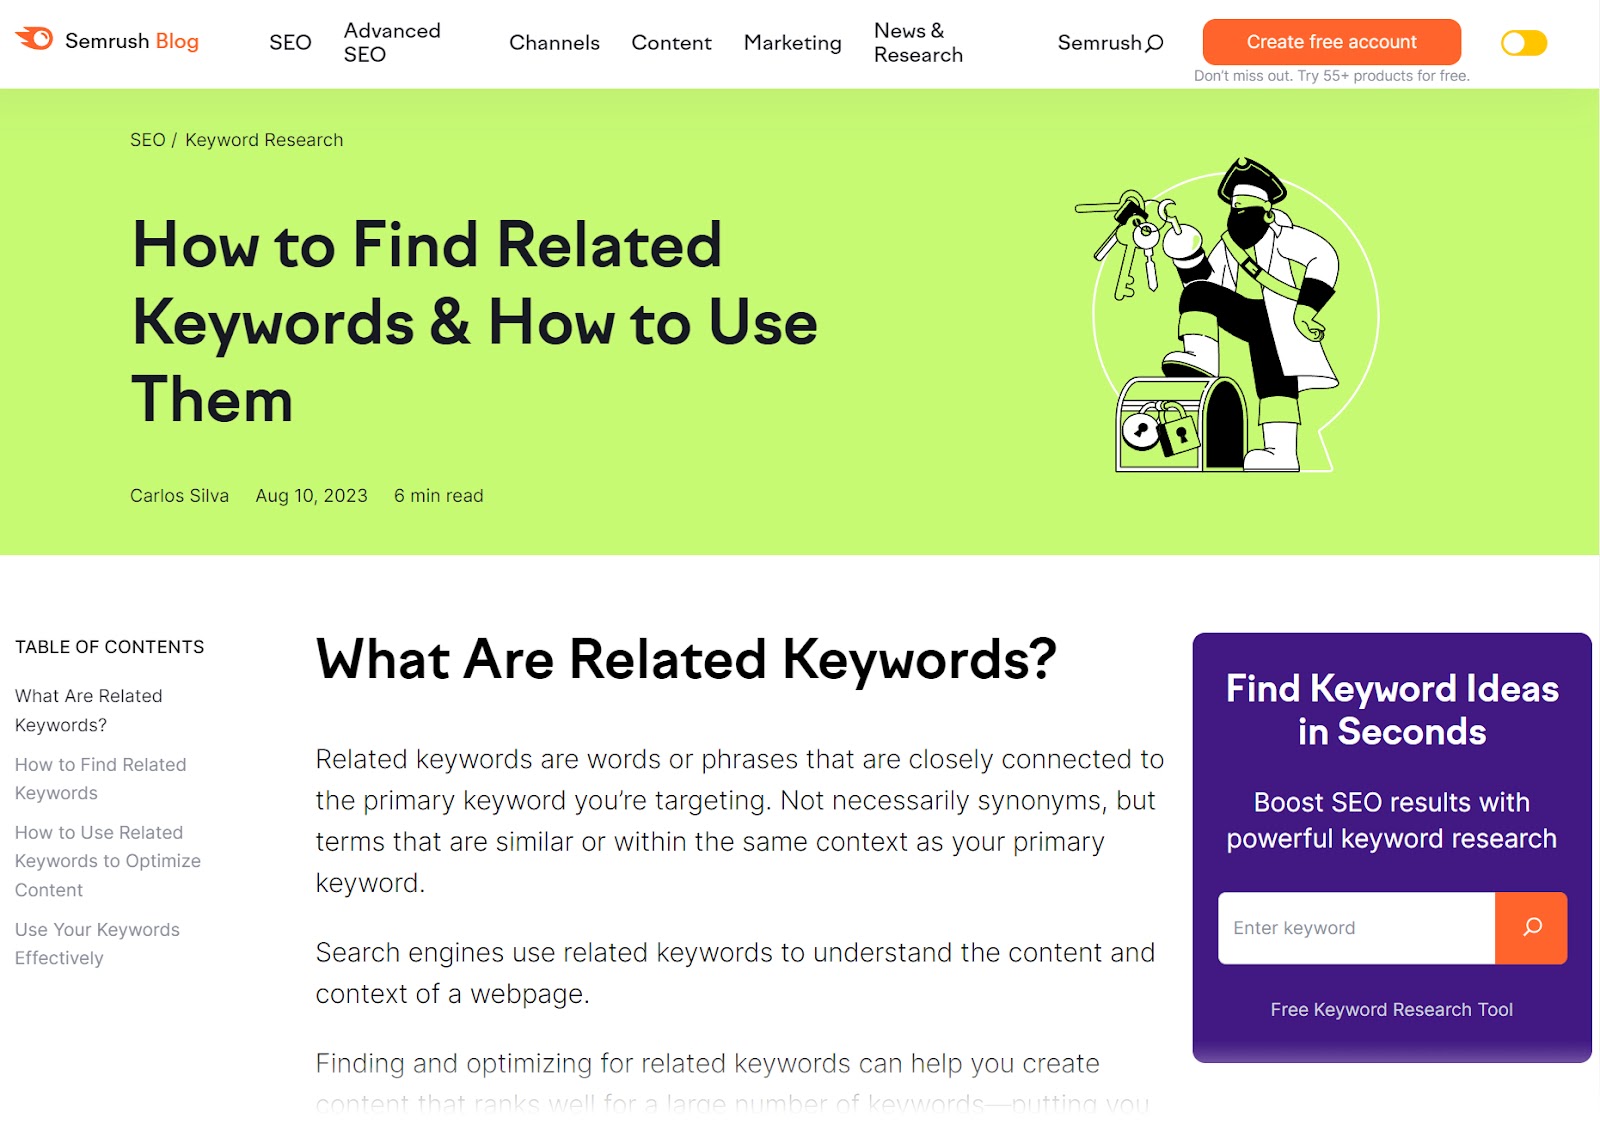 "How to find related keywords & how to use them" Semrush blog post